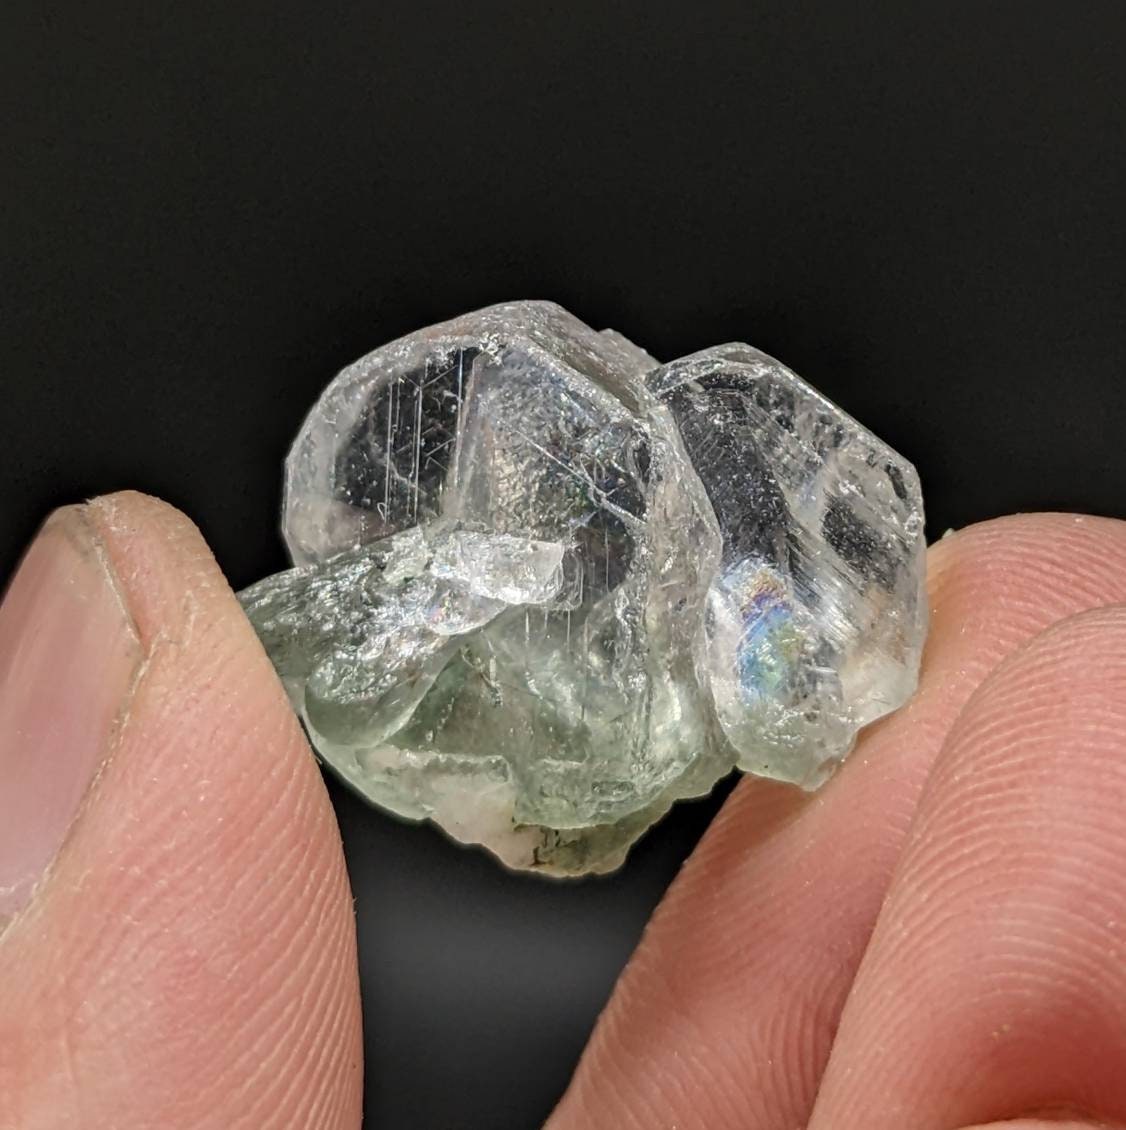 ARSAA GEMS AND MINERALSLight purple apatite twin crystal with green basolite inclusion from KP Pakistan, 6 gram - Premium  from ARSAA GEMS AND MINERALS - Just $25.00! Shop now at ARSAA GEMS AND MINERALS